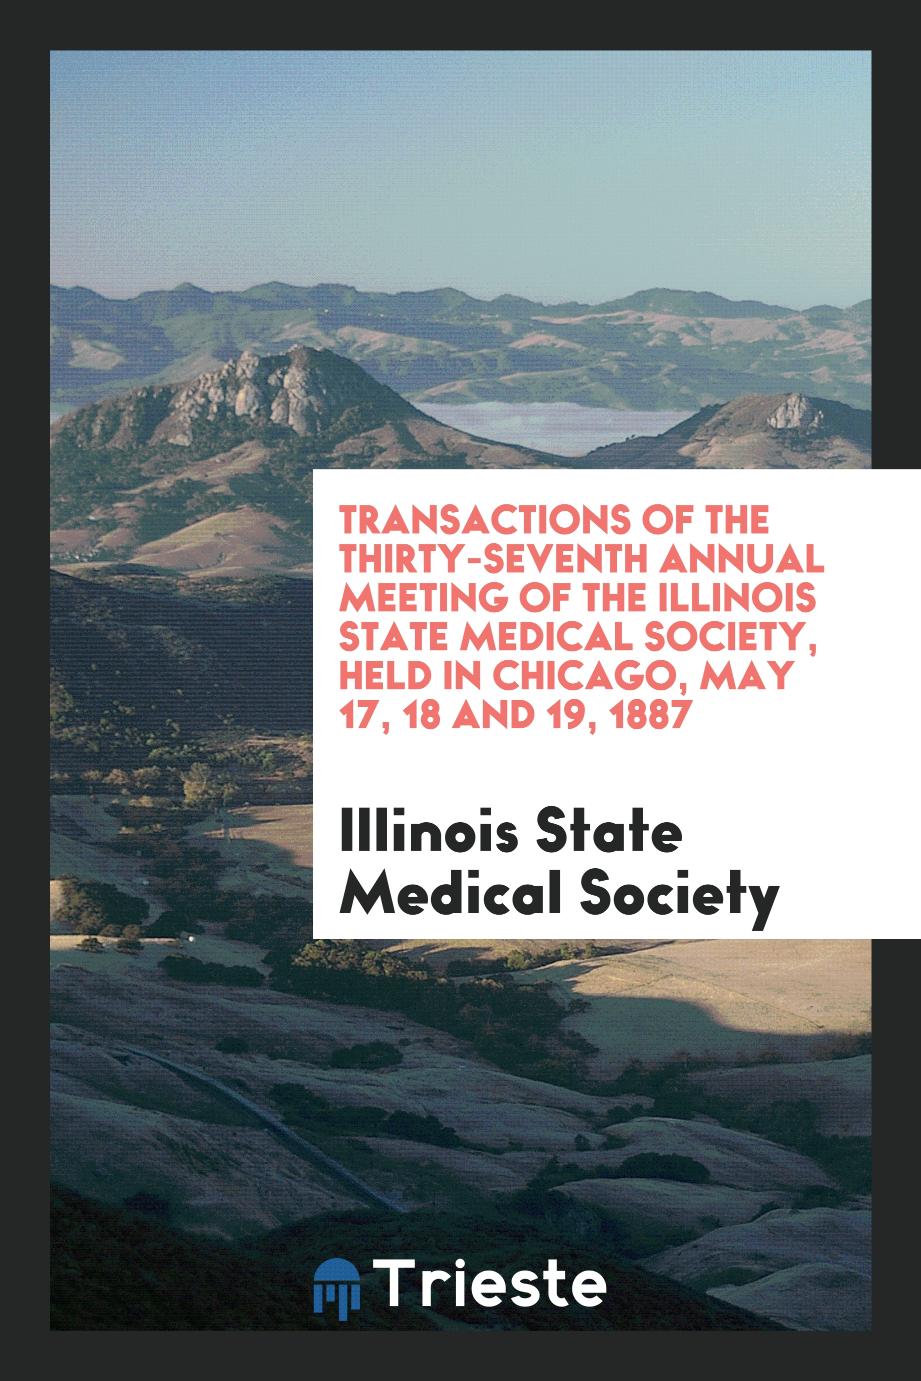 Transactions of the Thirty-Seventh Annual Meeting of the Illinois State Medical Society, Held in Chicago, May 17, 18 and 19, 1887